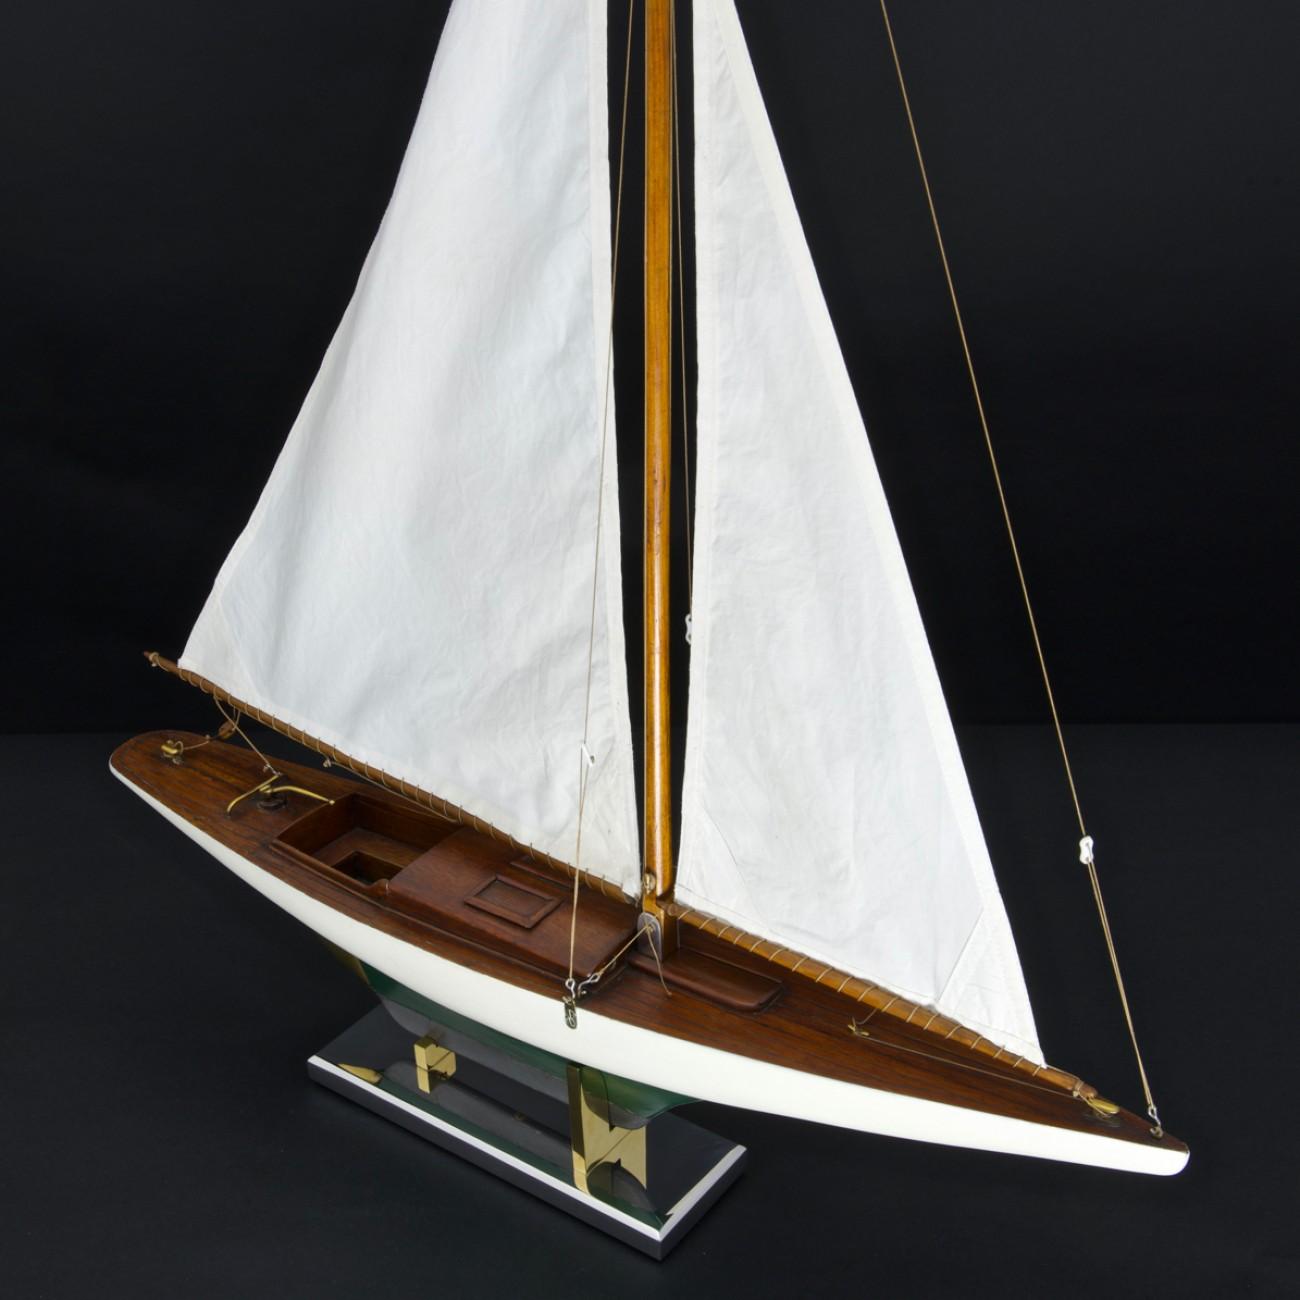 A sleek 1930s Bermudian rigged 24 inch pond yacht with painted hull and lead keel. The sails are copies of the originals and the model sits on a newly made metal stand. This model this particularly unusual as the cabin is fitted out with a table and